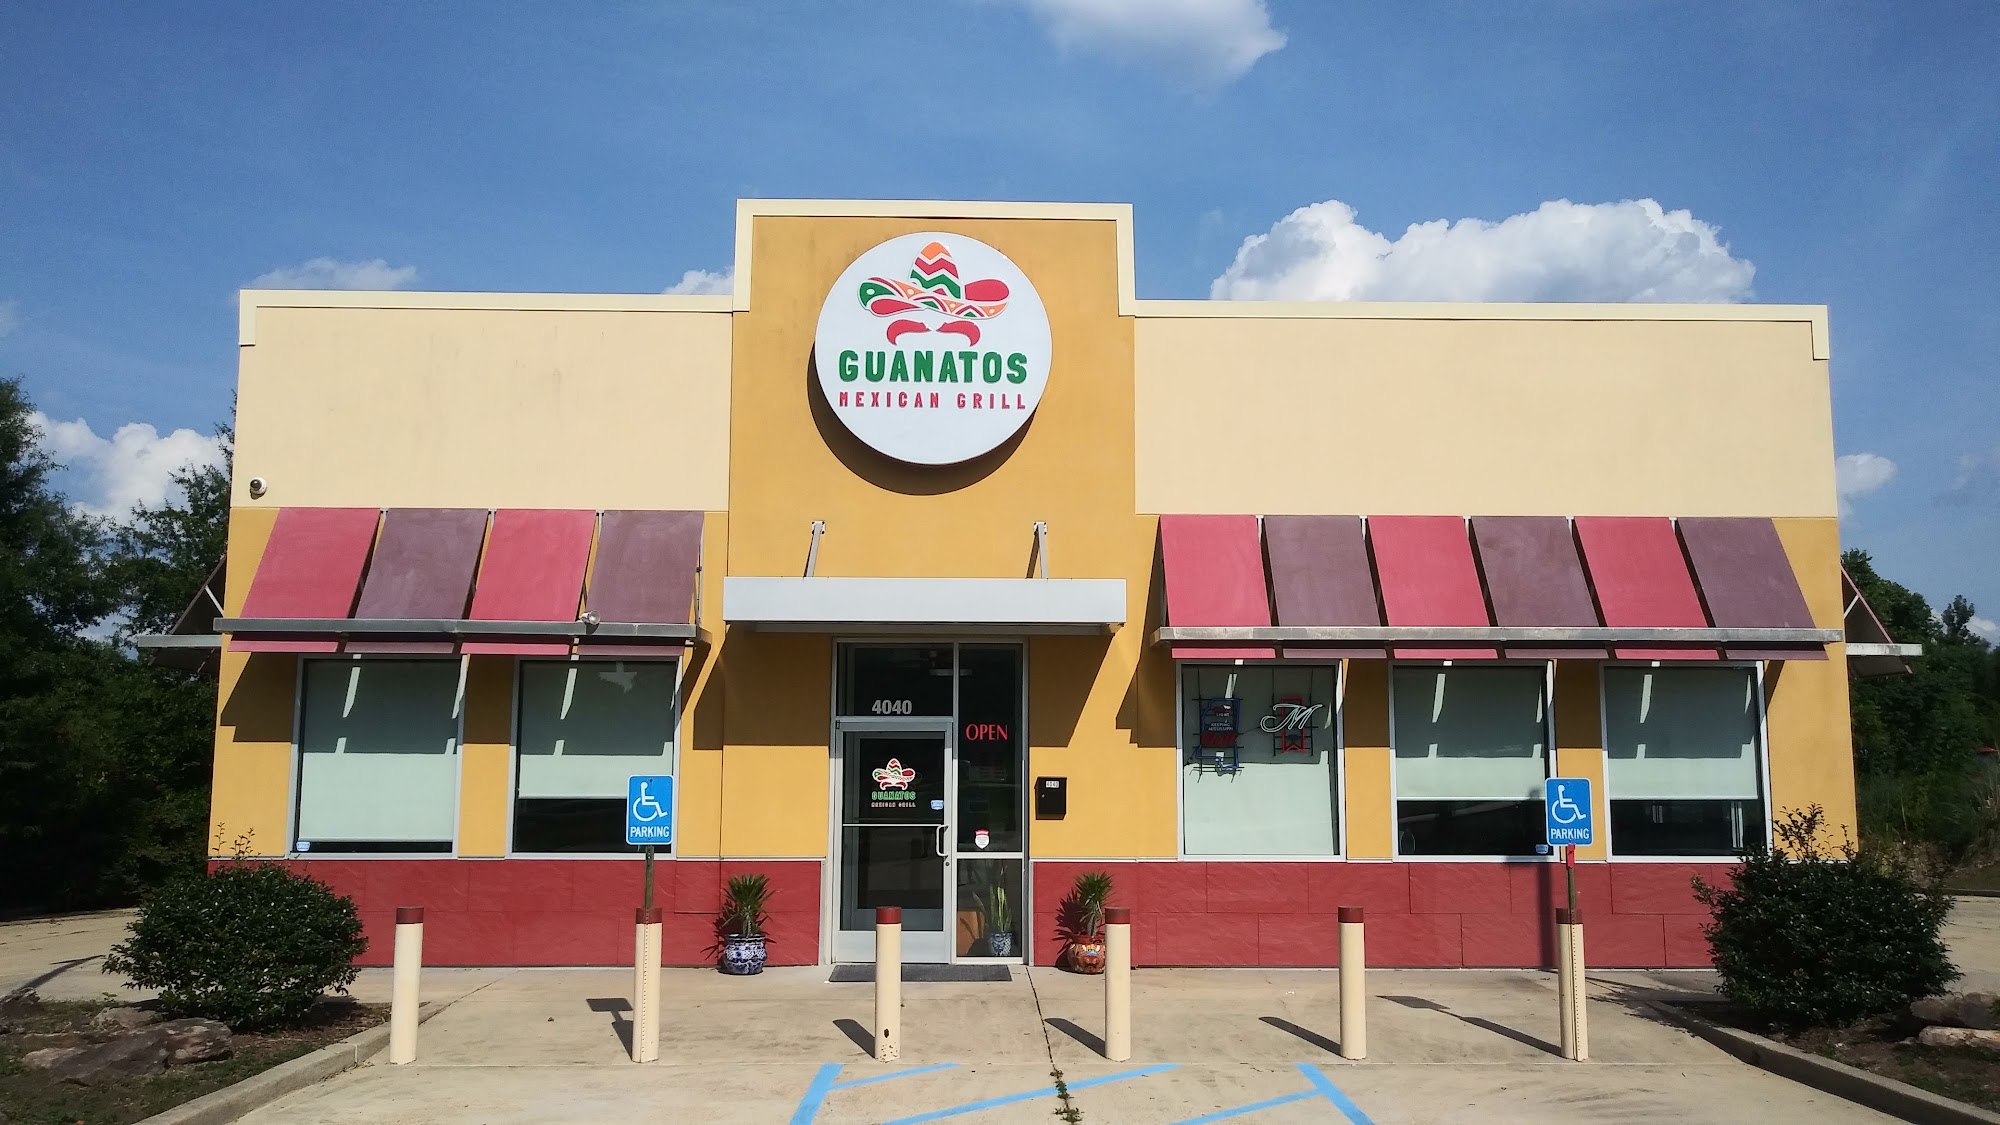 Guanatos Mexican Grill